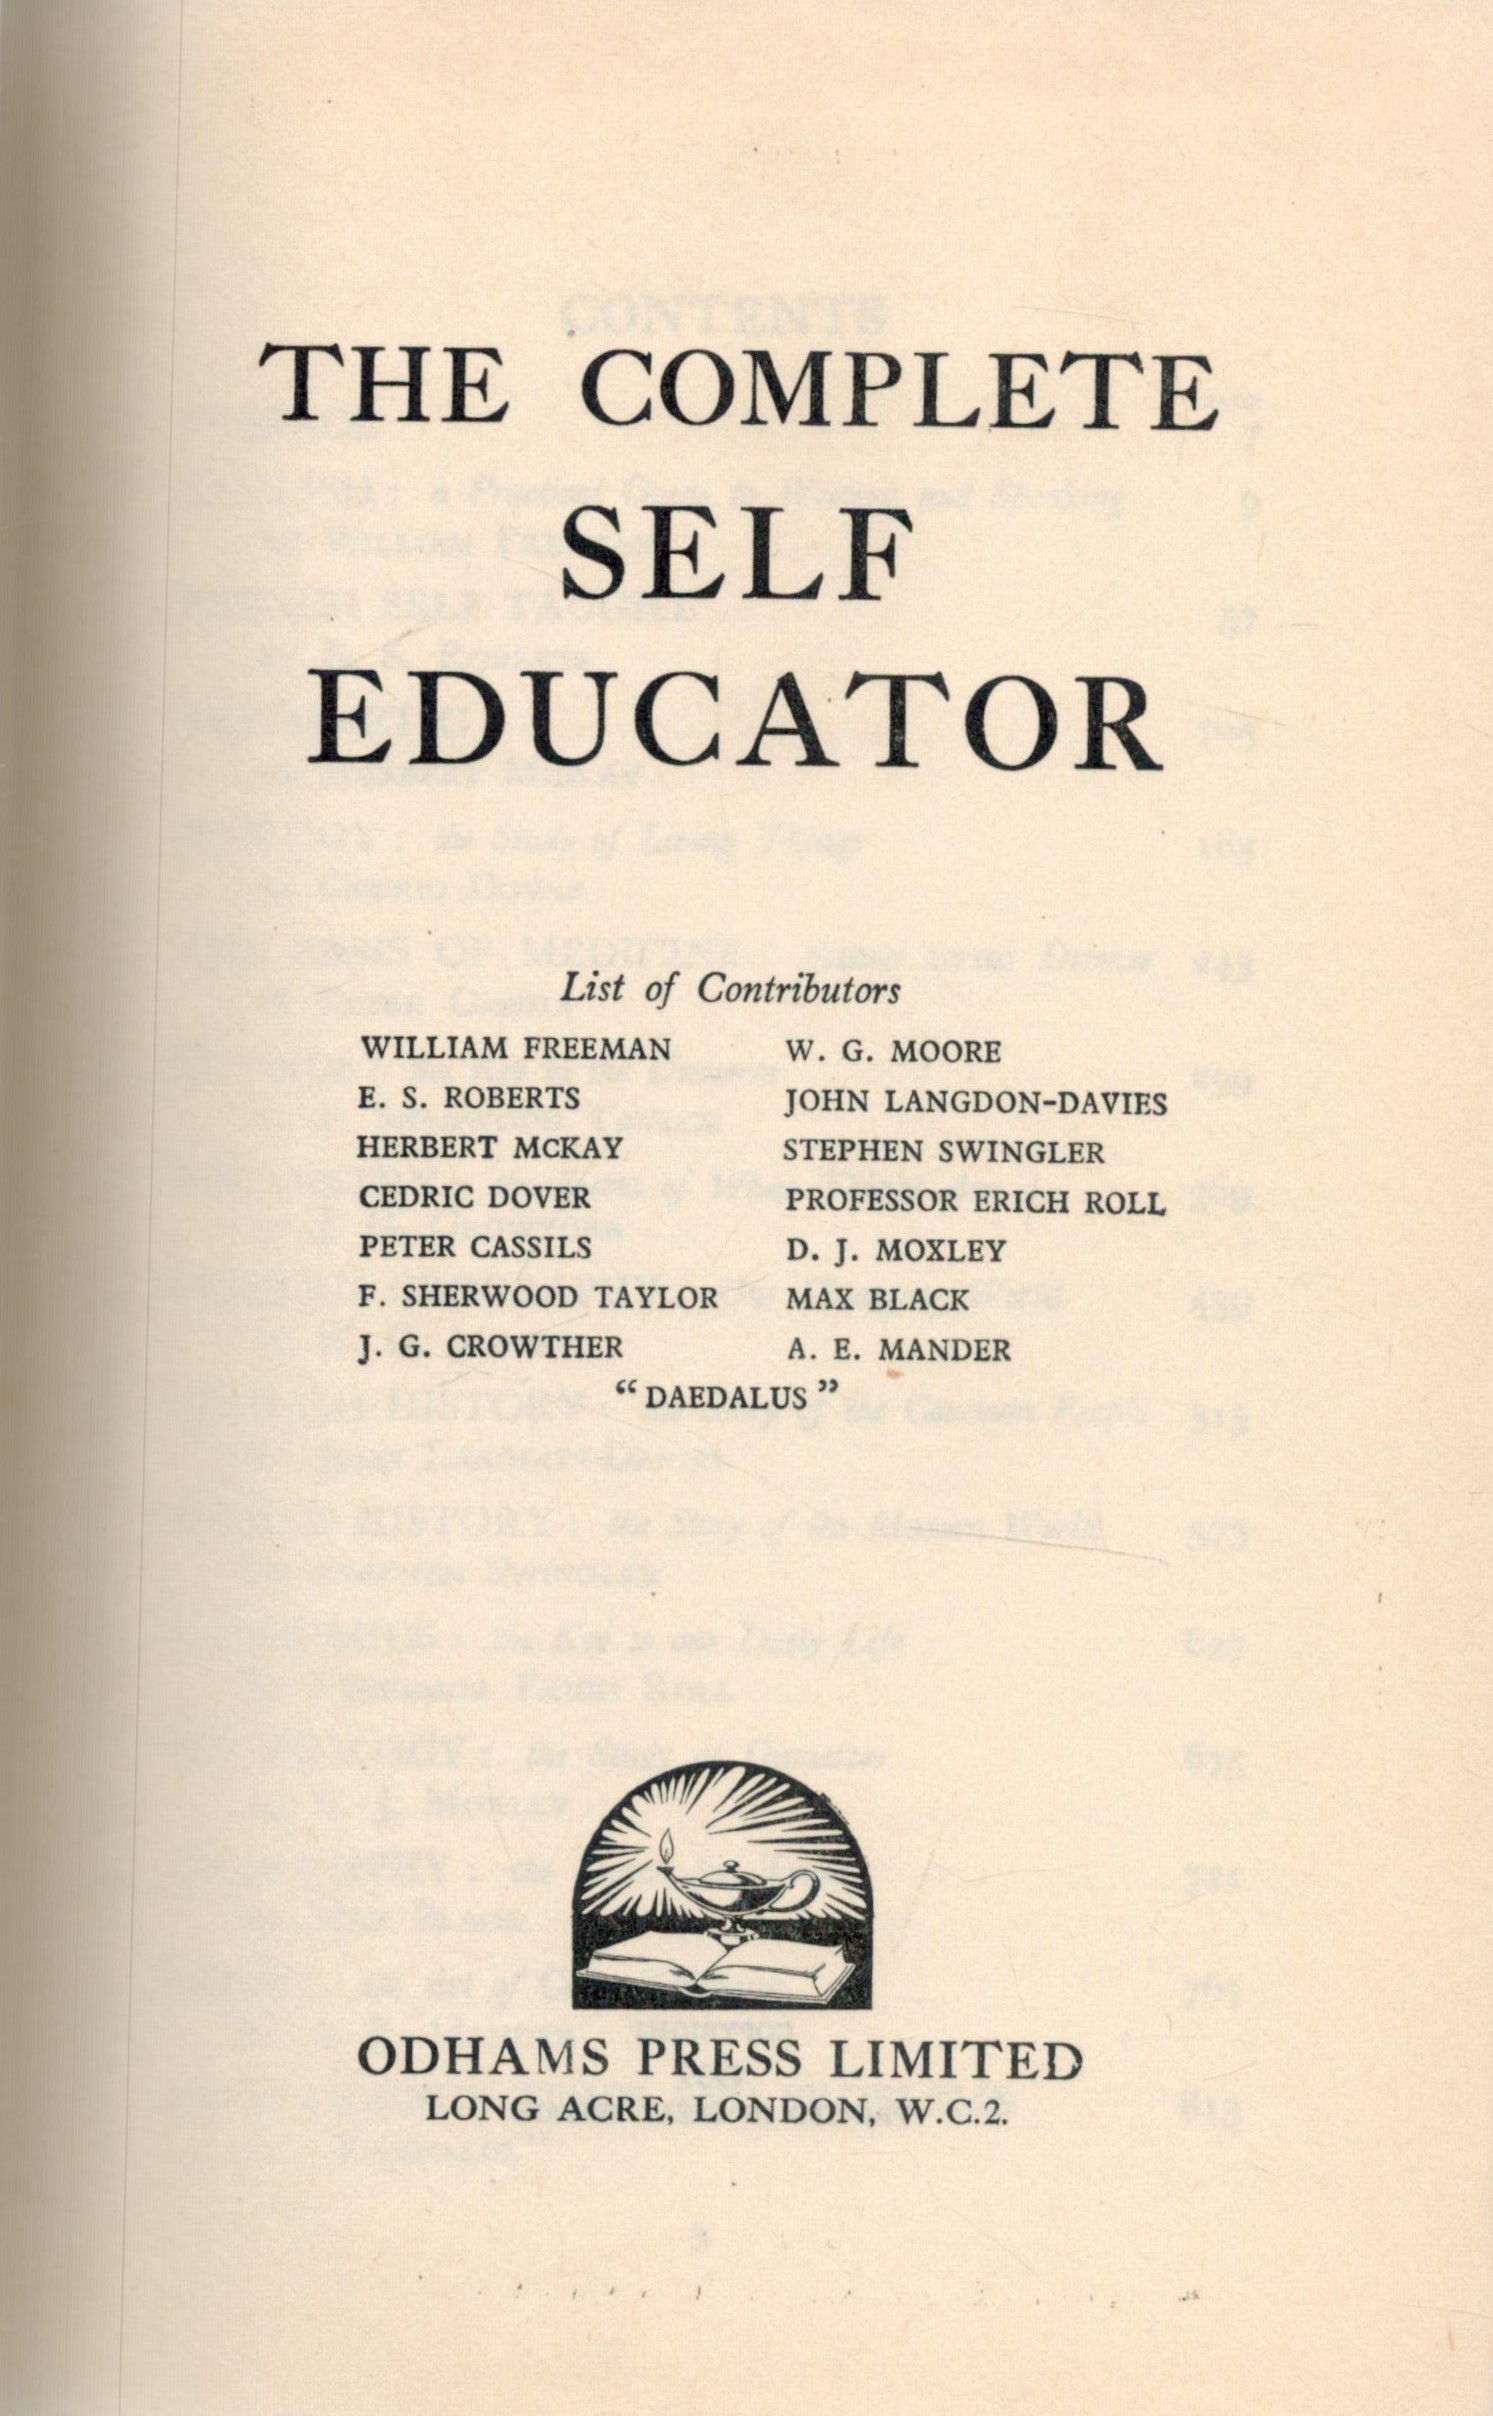 The Complete Self Educator date & edition unknown Hardback Book with 832 pages published by Odhams - Image 2 of 2